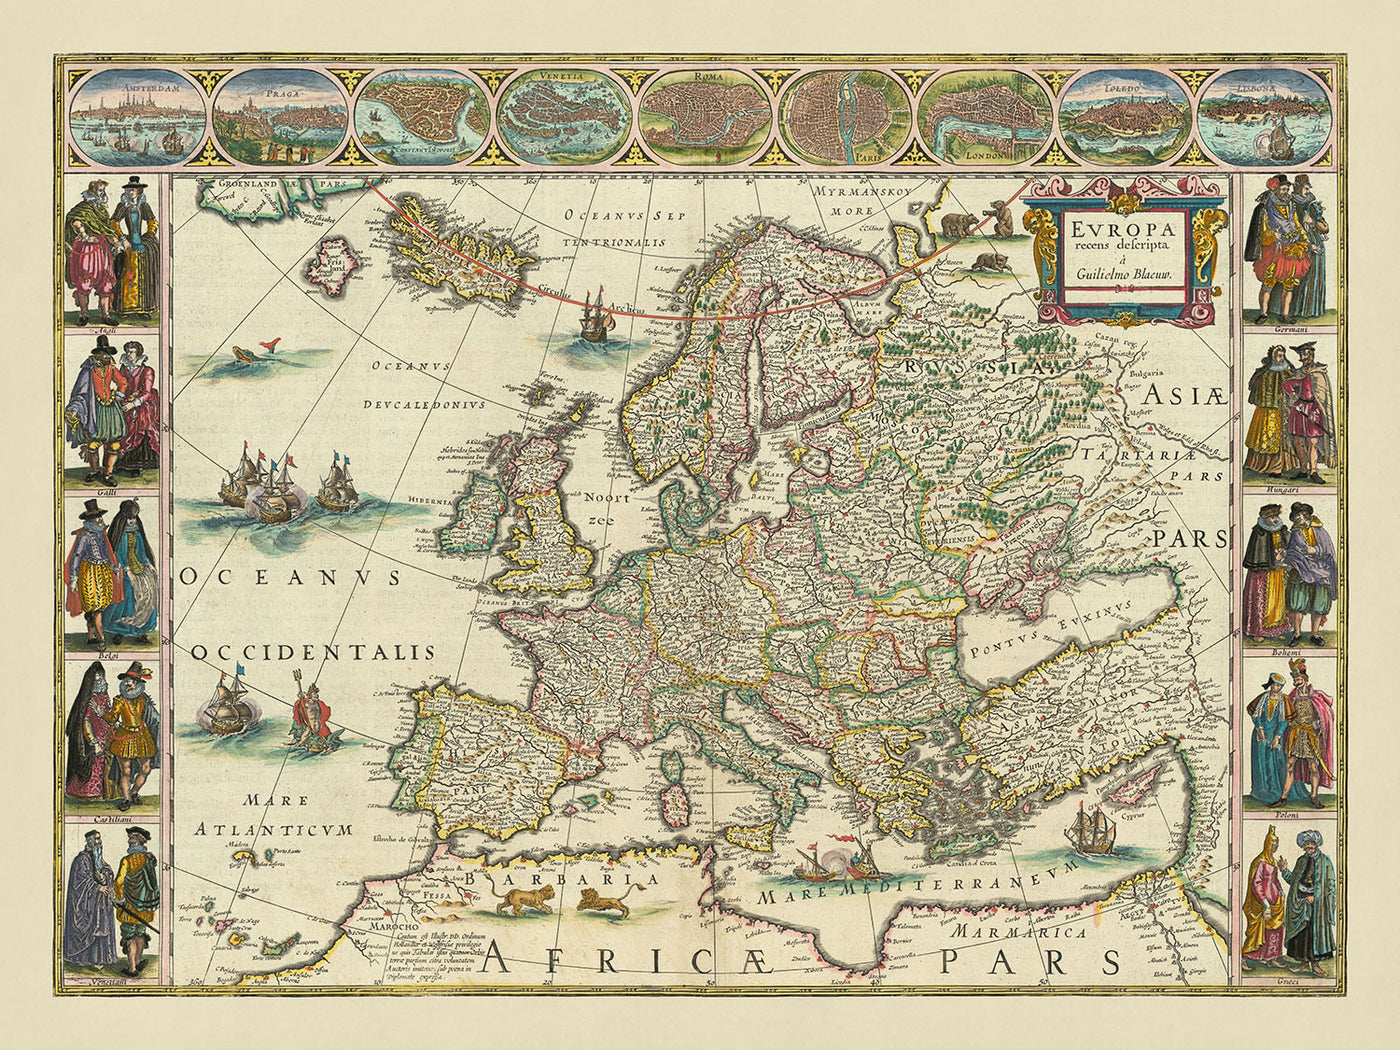 Old Map of Europe by Willem Blaeu, 1630: Dutch Masterpiece, Cultural Illustrations, Mythical Elements